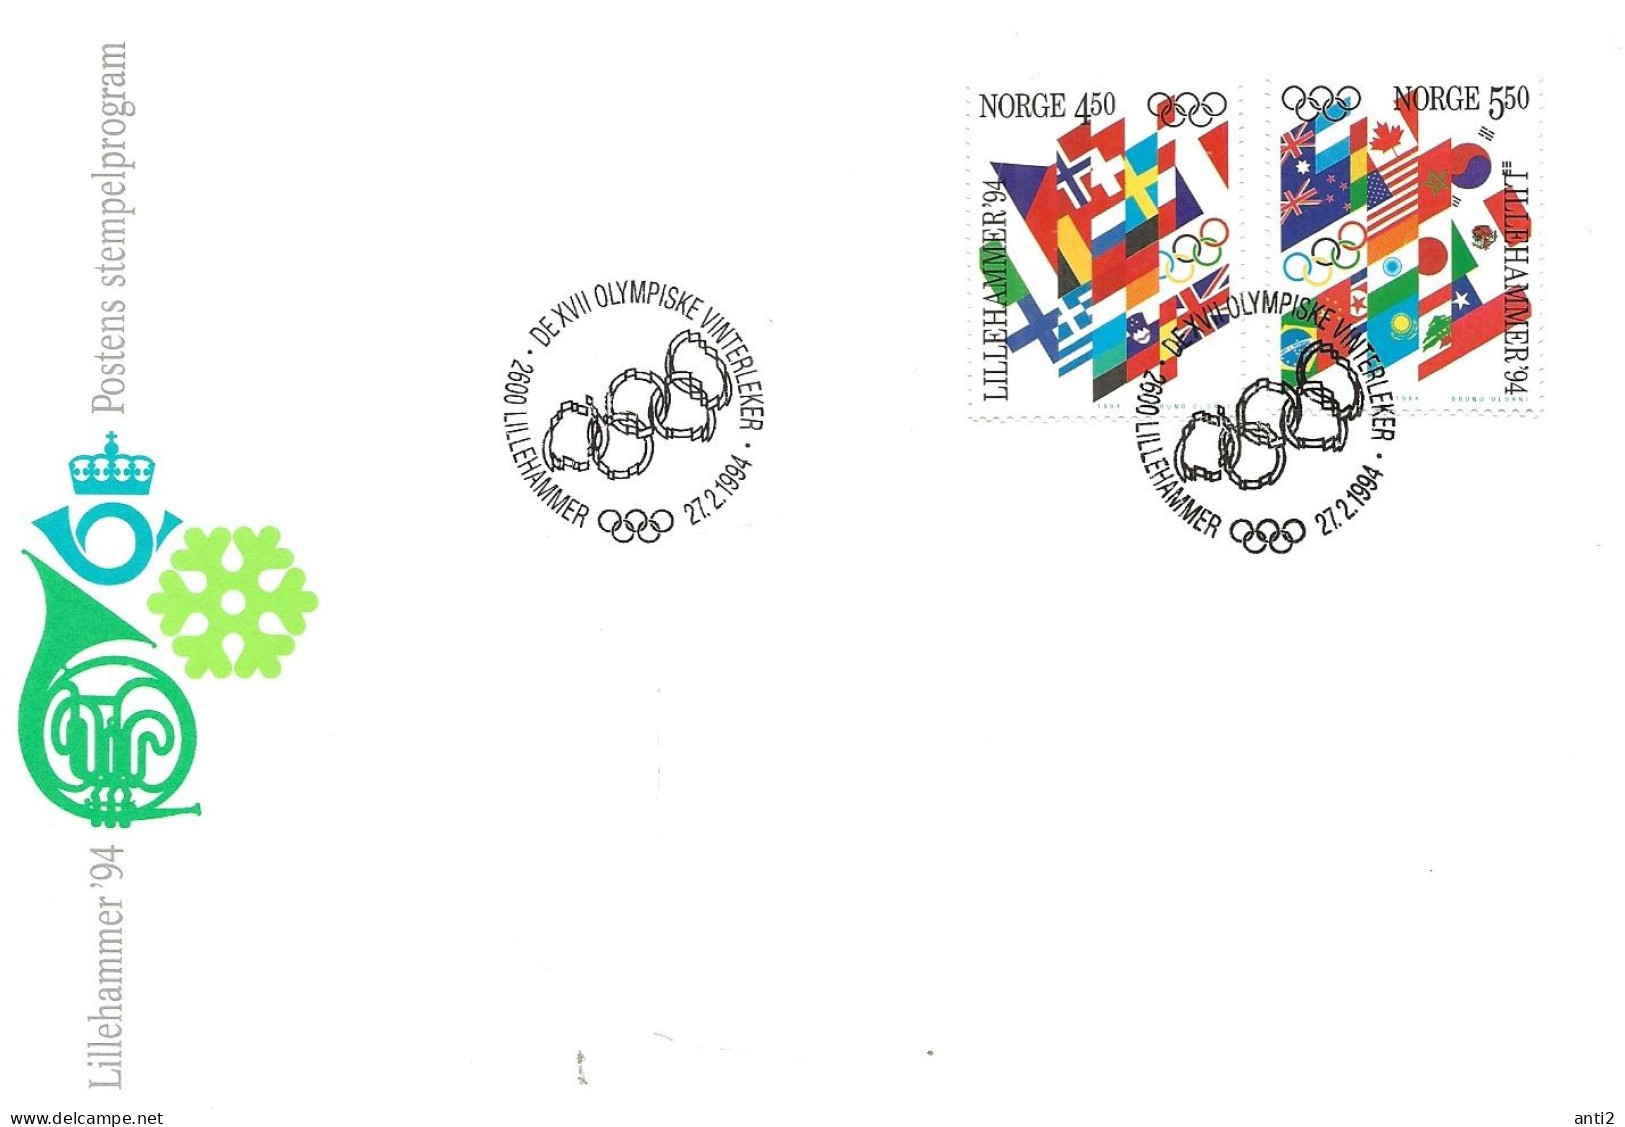 Norway Norge 1994 Olympic Winter Games Lillehammer 1994, Flags Mi 1145-1146 Cover Cancelled 7.2.1994 - Lettres & Documents